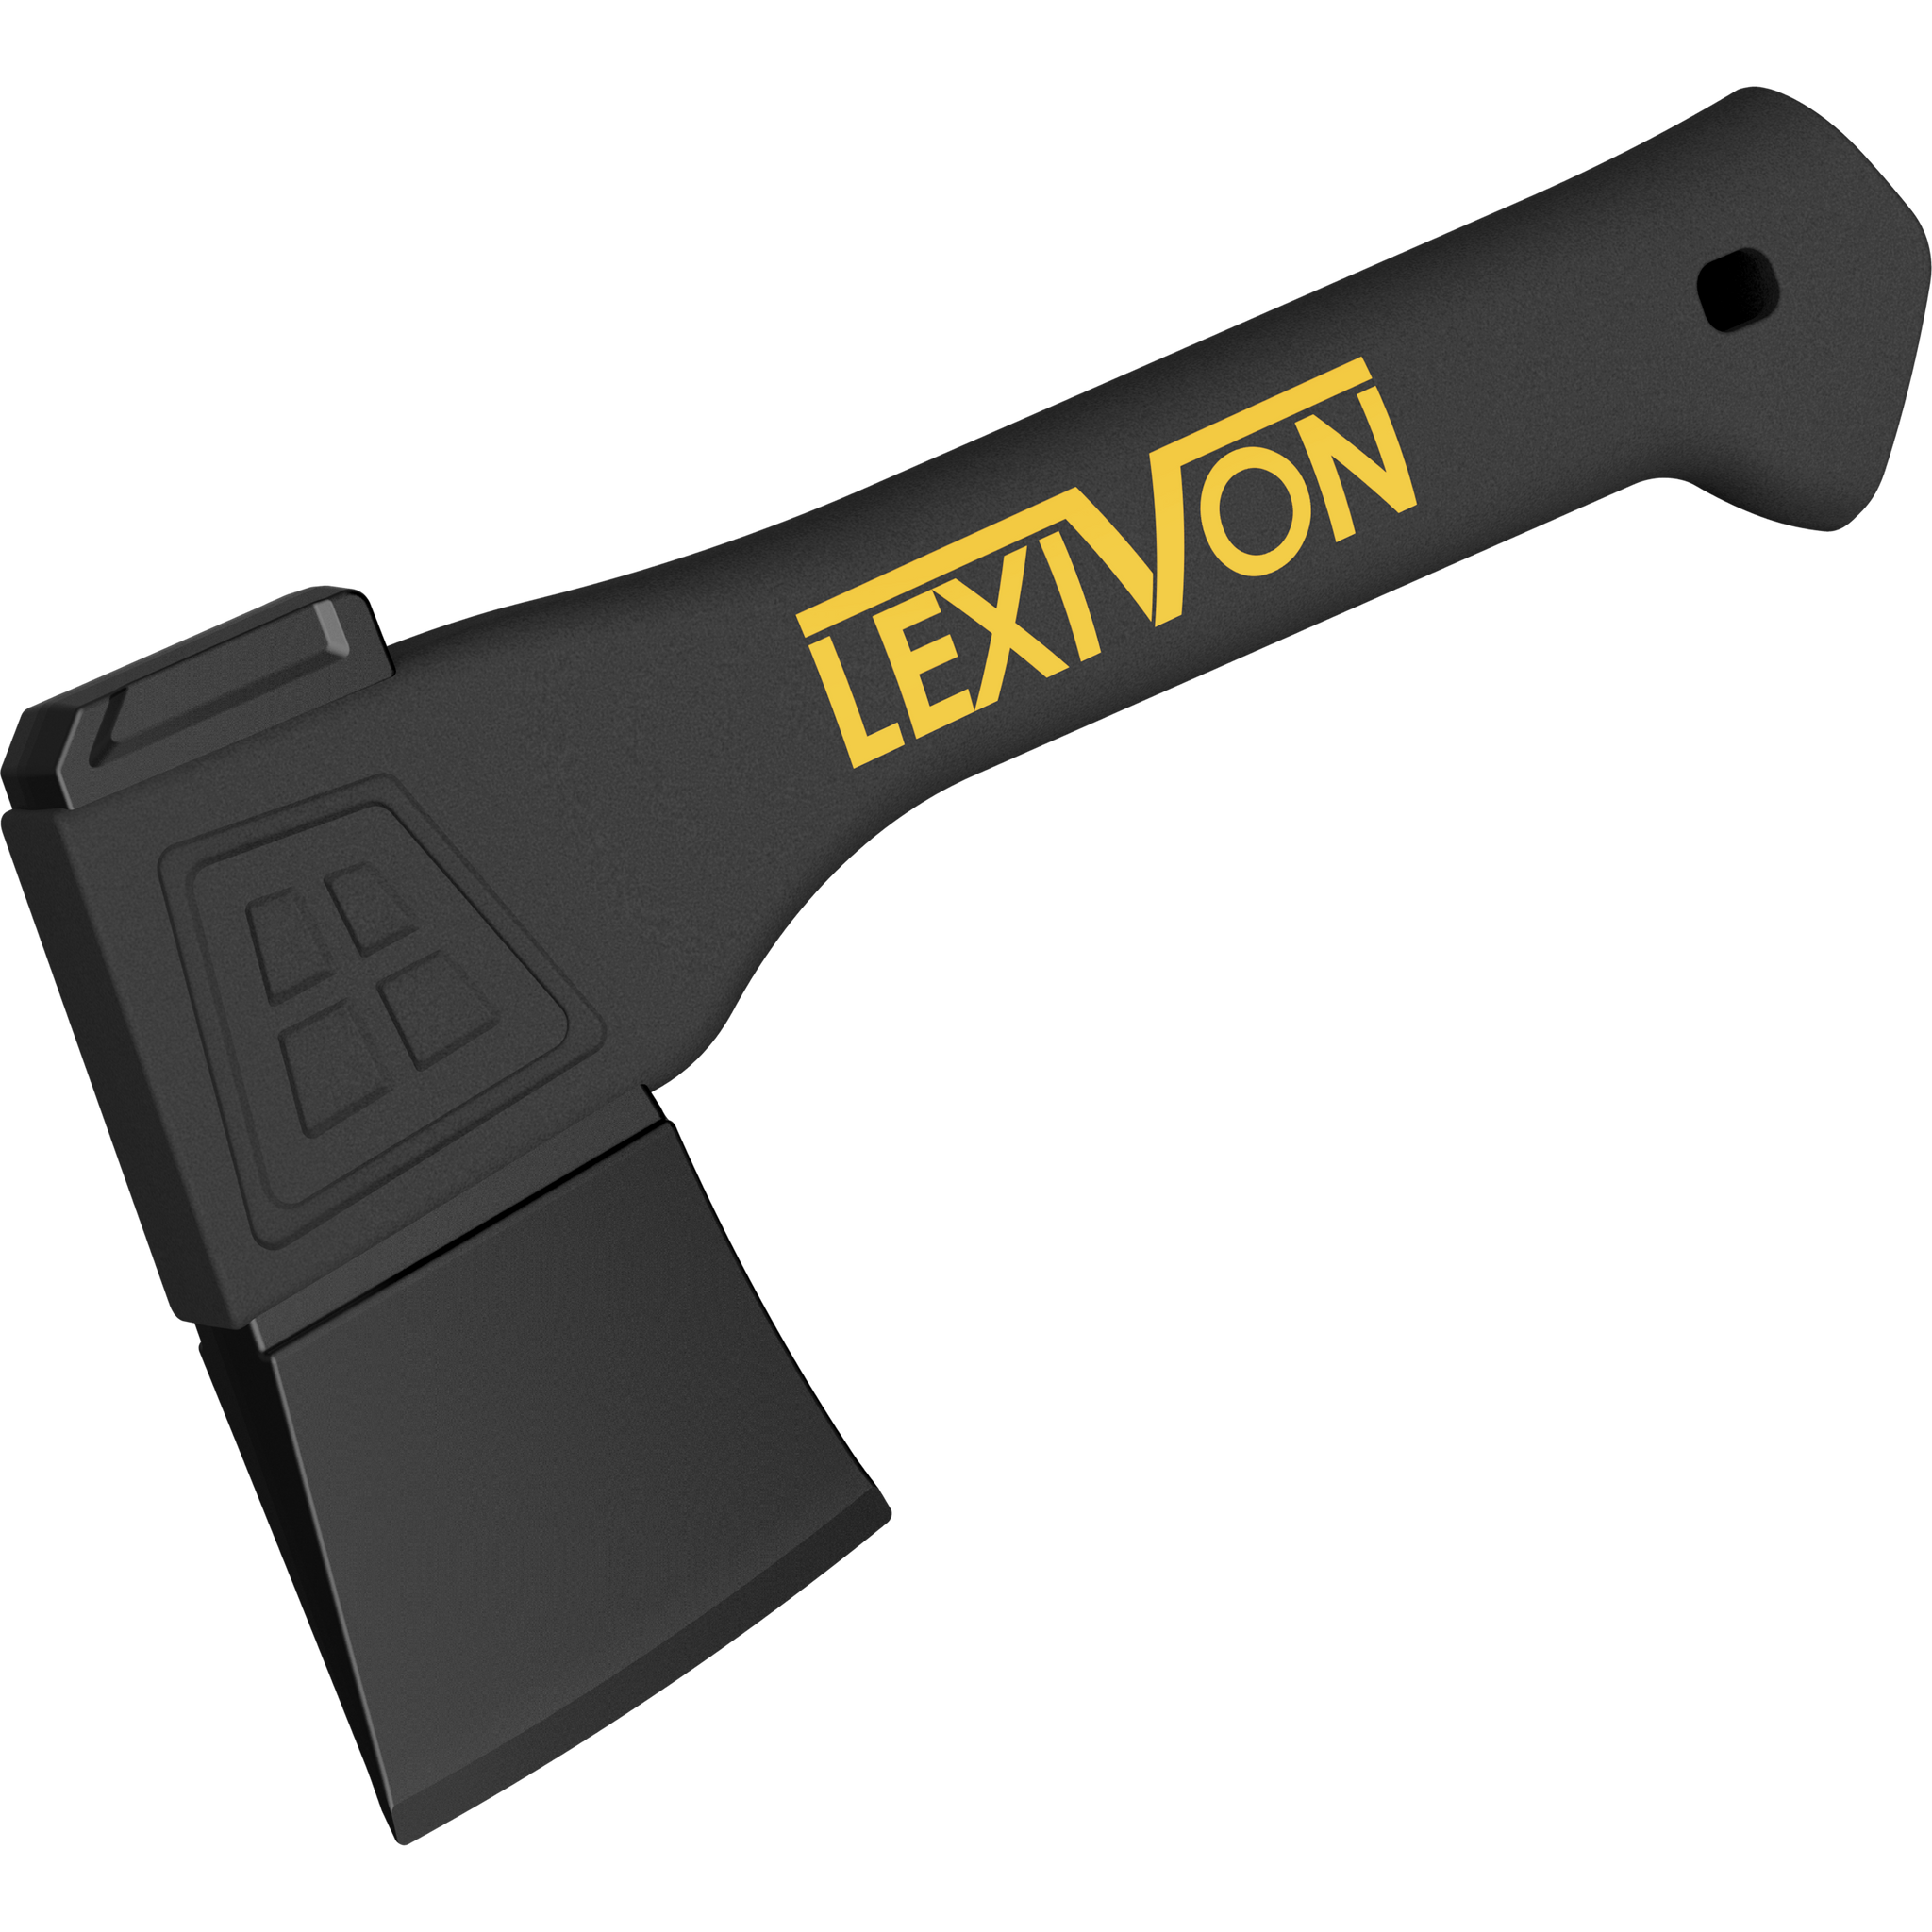 LEXIVON V9 Camping Hatchet, 9-Inch Axe | Ergonomic Grip, Lightweight Fiber-glass Composite Handle | Protective Carrying Sheath Included (LX-V9)